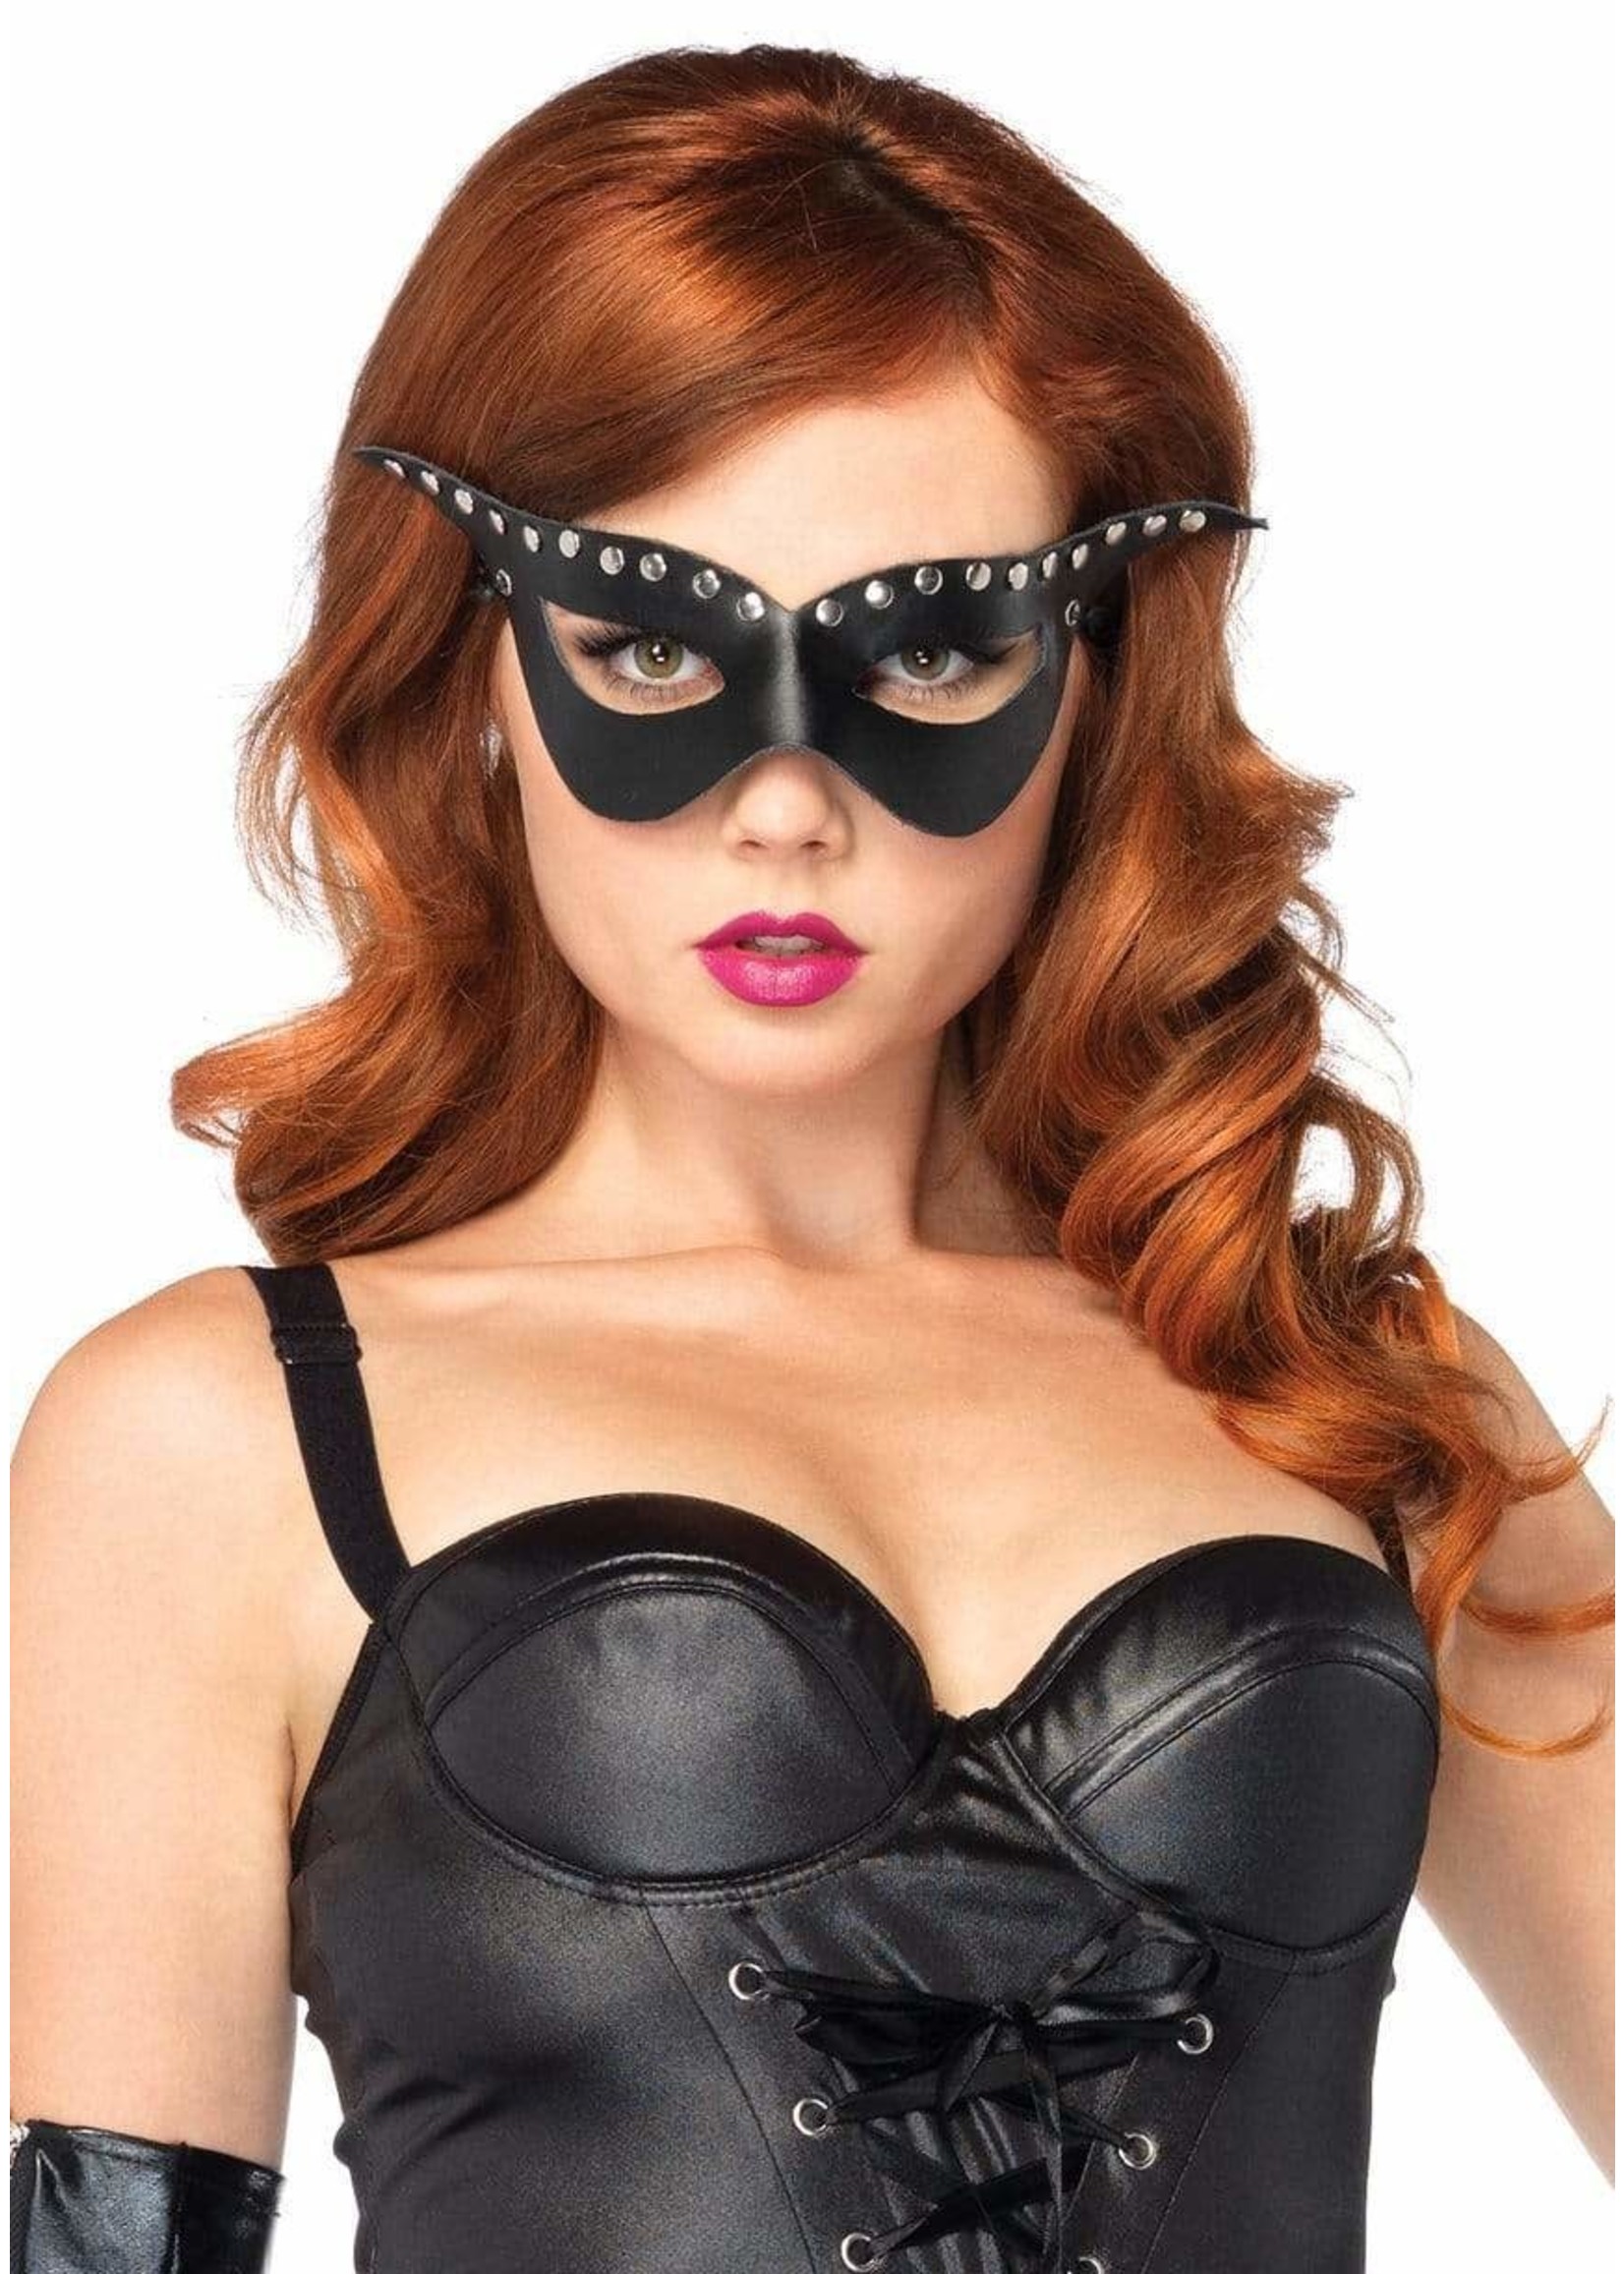 Leg Avenue Bad Girl Studded Costume Mask With Strap